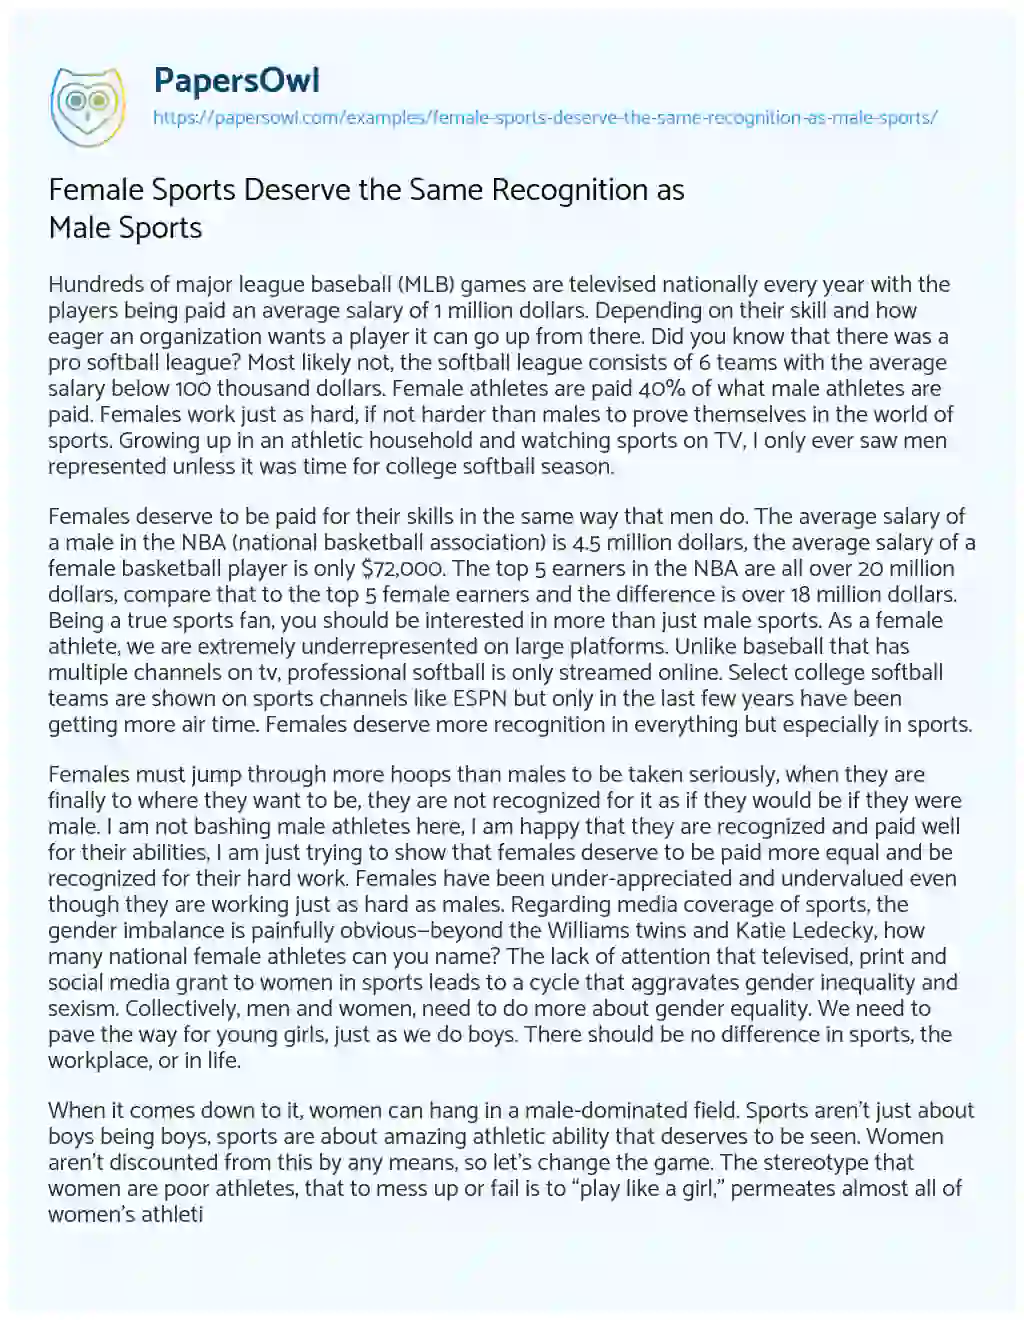 Female Sports Deserve the same Recognition as Male Sports essay